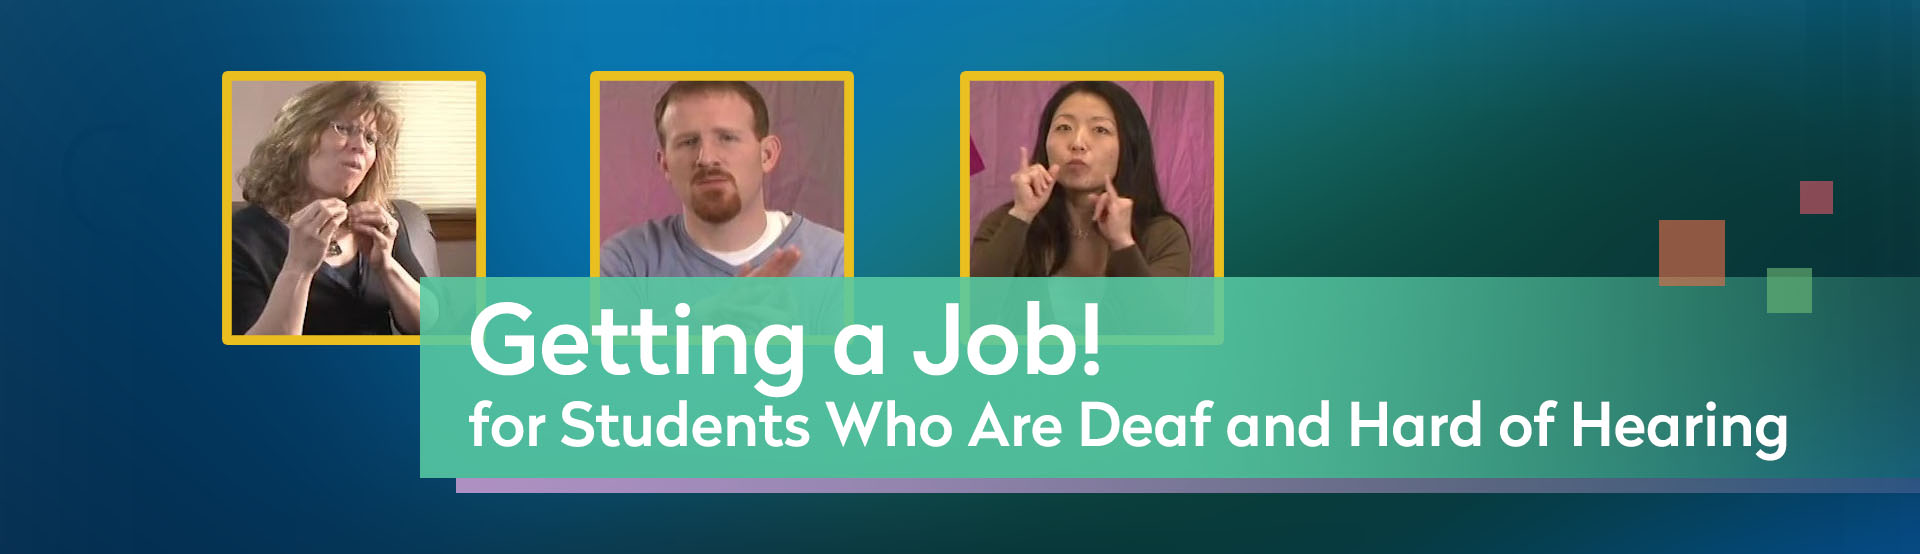 Getting a Job! for Students Who Are Deaf and Hard of Hearing